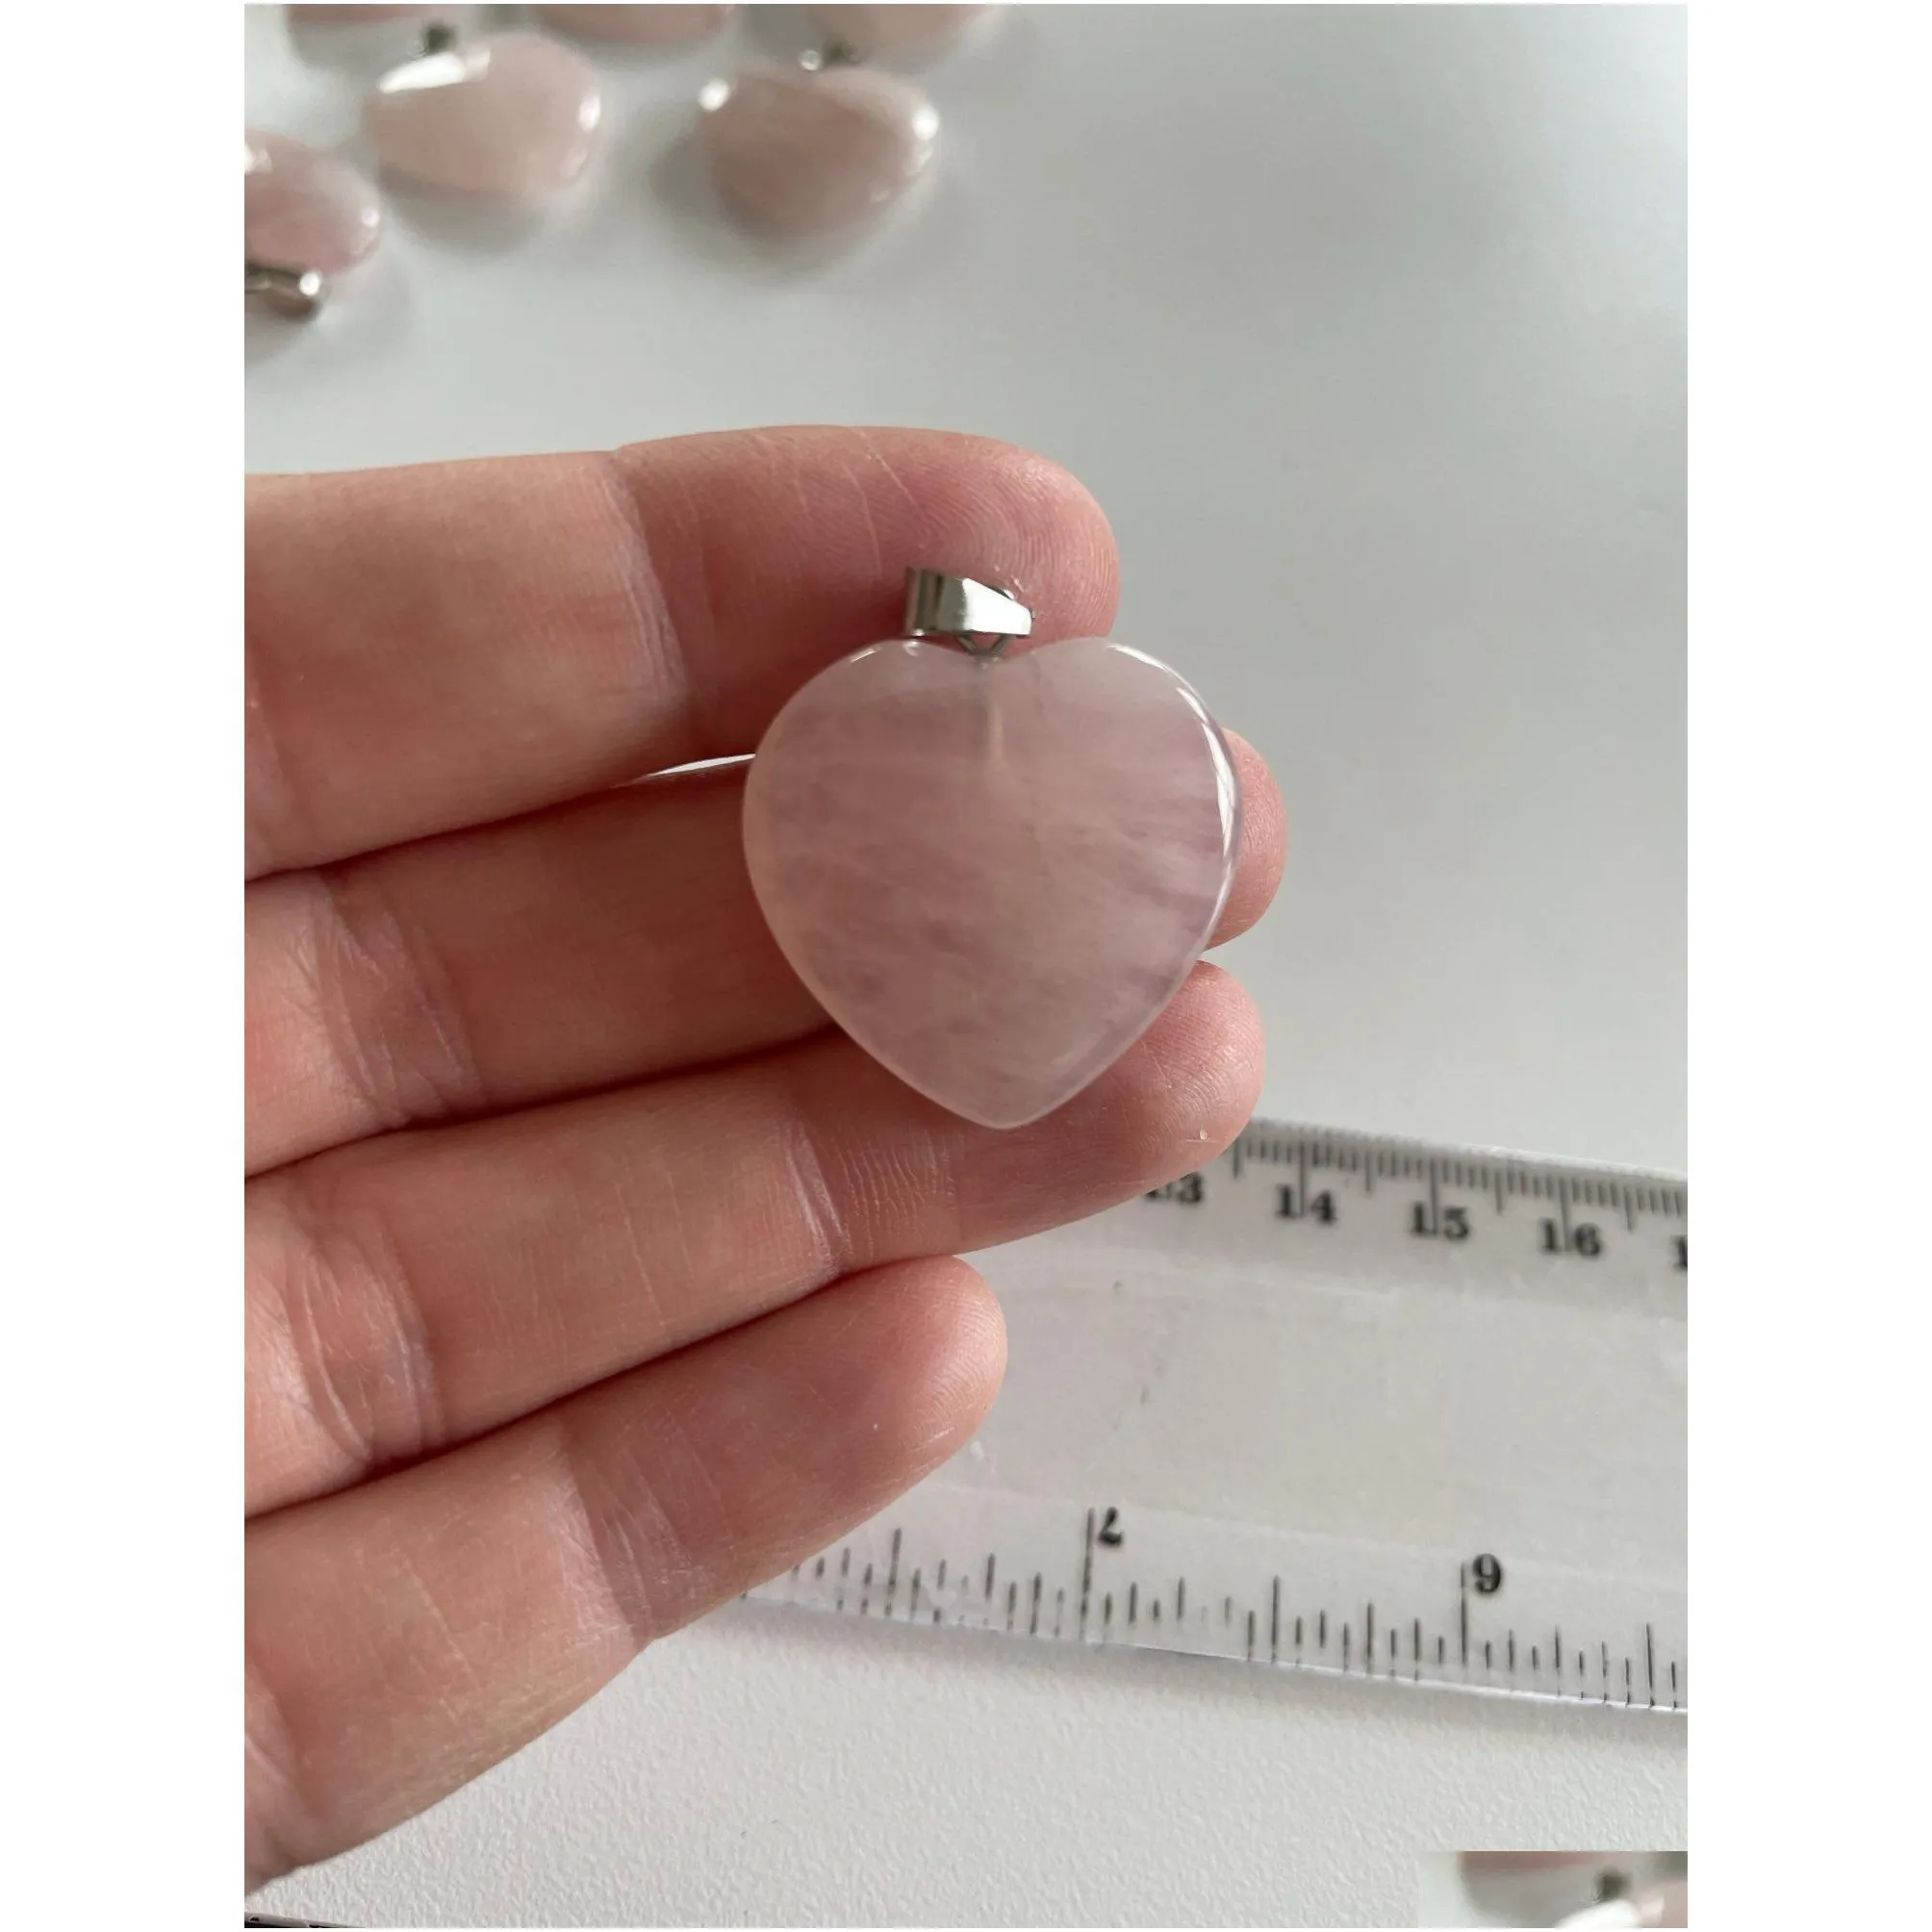 Charms Rose Quartz Heart Natural Stone Charms Chakra Healing Pendant Diy Necklace Earrings Jewelry Making Drop Delivery Jewelry Jewelr Dhmvj